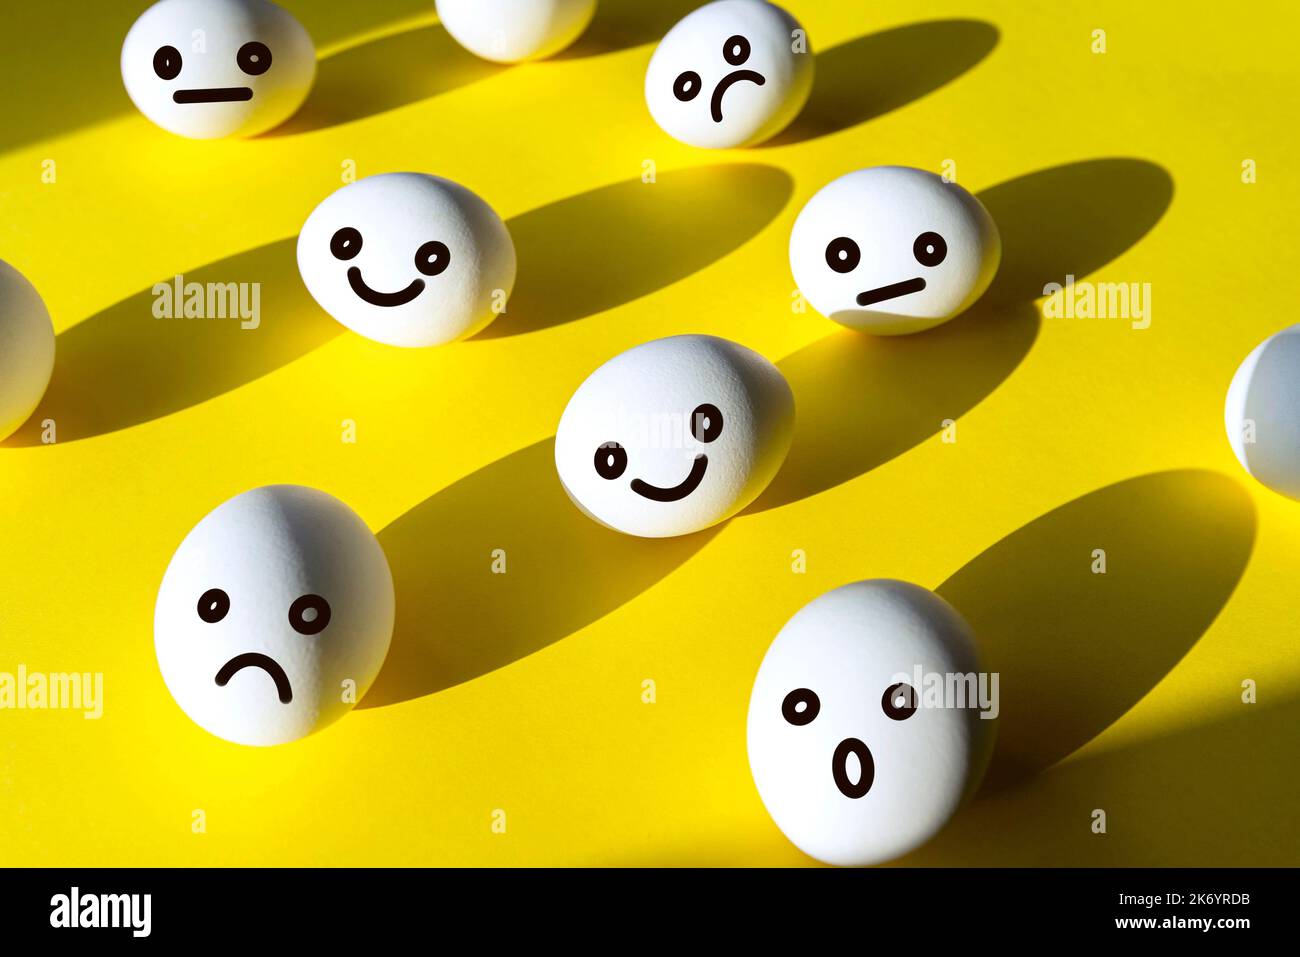 Concept picture about emotionality with happy, unhappy, angry and surprised faces of eggs on yellow background, creativity collage Stock Photo